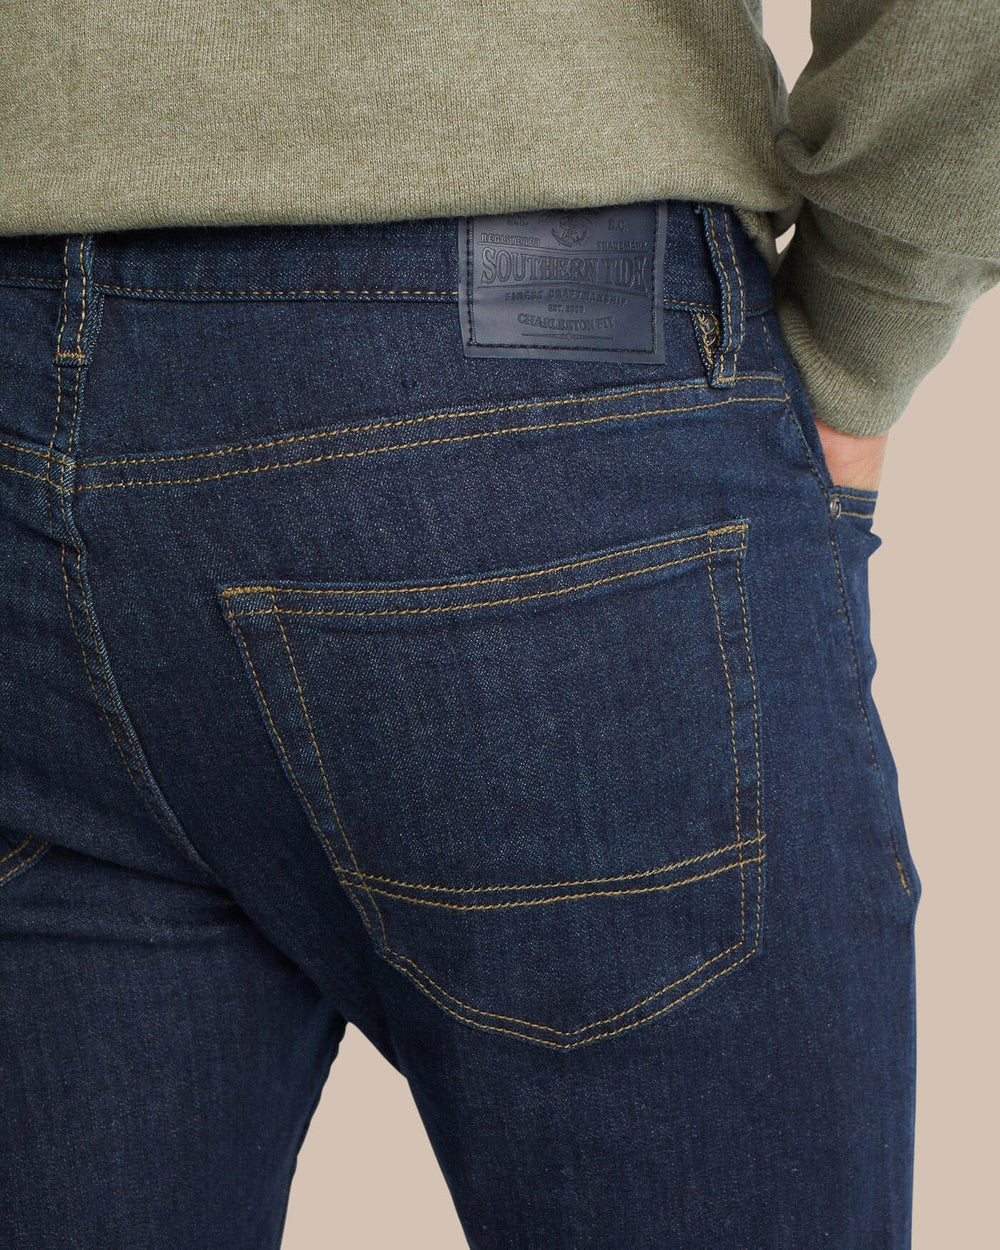 The pocket view of the Men's Blue Denim Charleston Denim Jeans by Southern Tide - Rinse